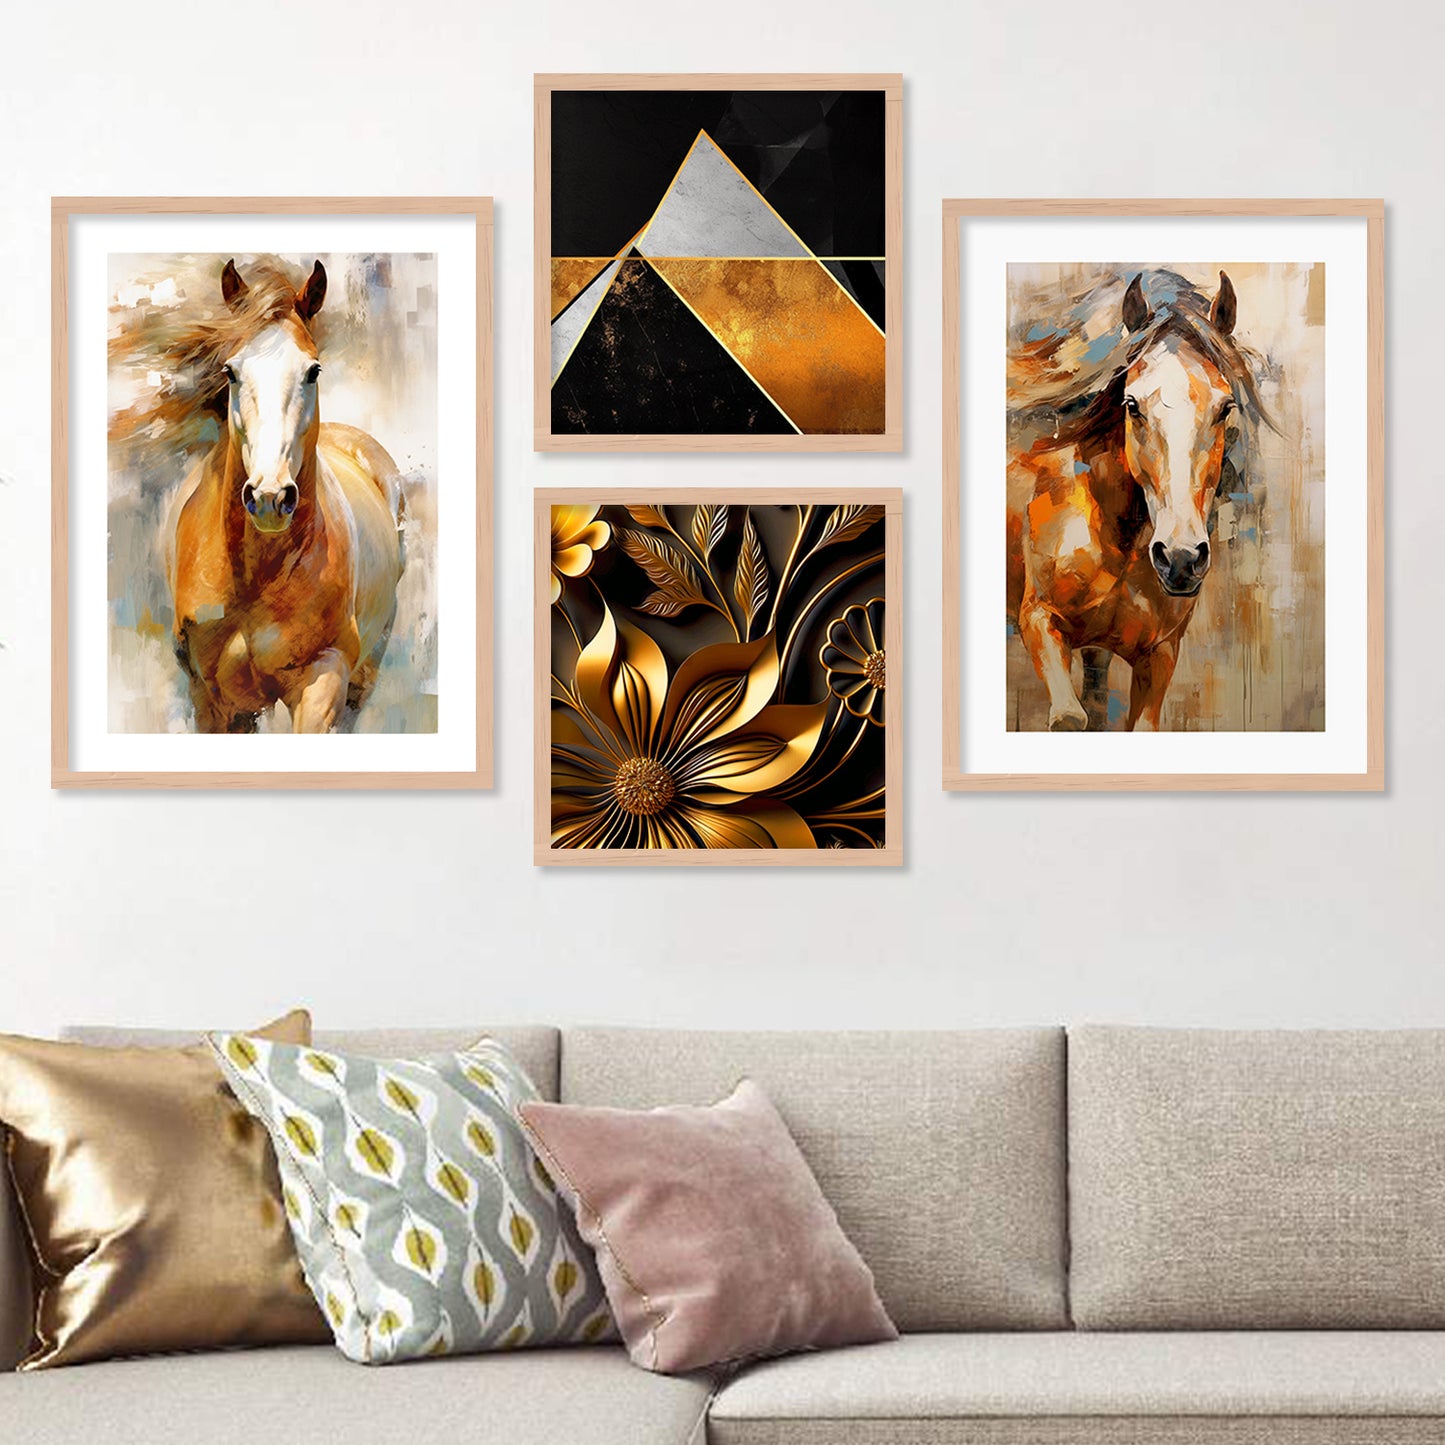 Aesthetic Golden and Black Modern Horse Art Wall Decor Paintings with Frame for Living Room Bedroom Home Decoration